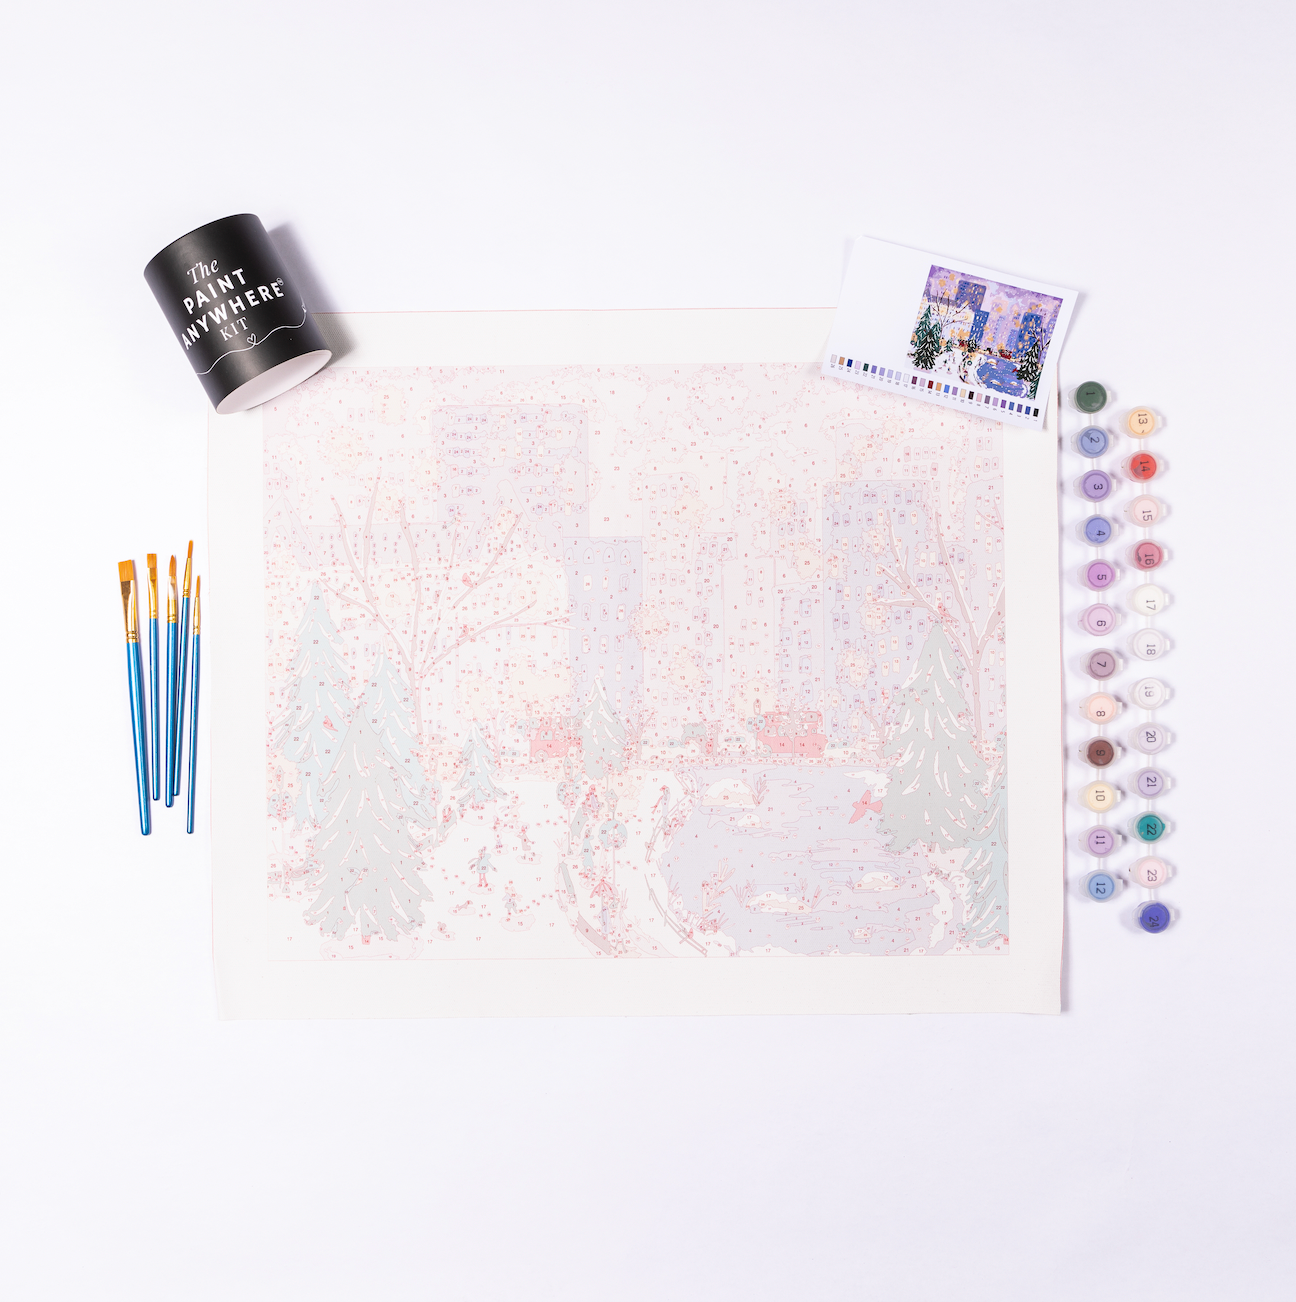 Central Park Winter Deluxe Paint by Numbers Kit